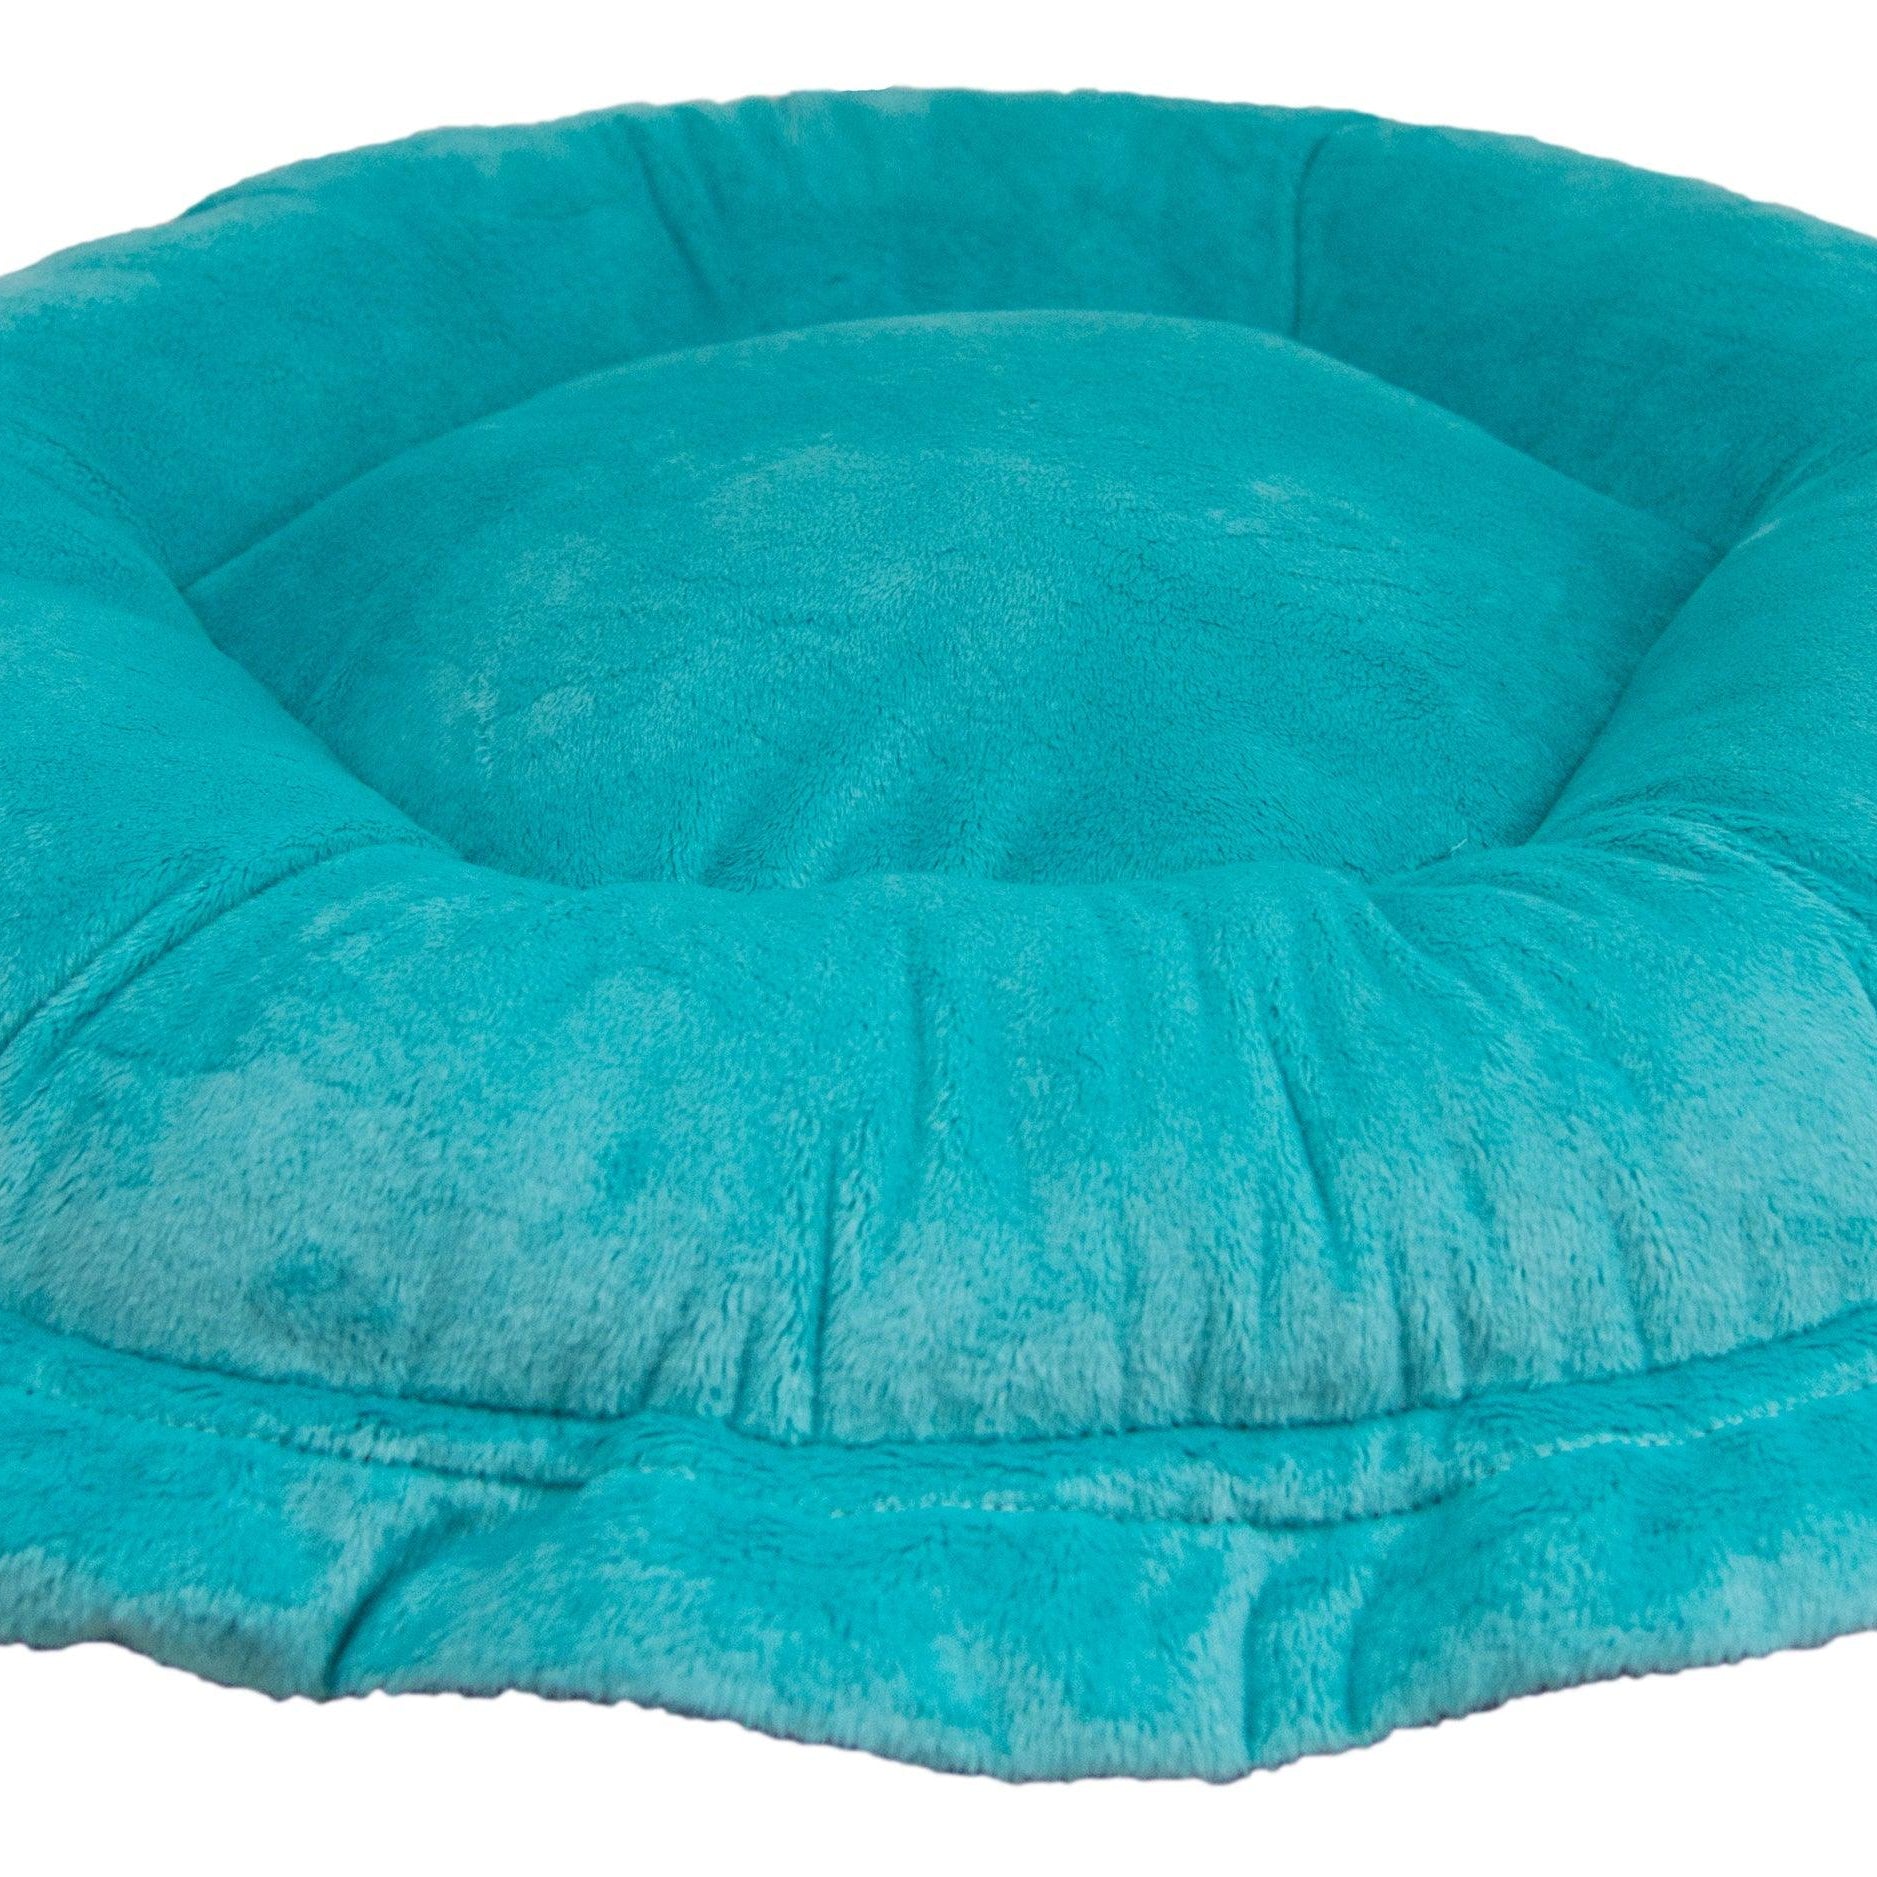 Lily Pod - Aqua Marine and Snow White Patch - Rocky & Maggie's Pet Boutique and Salon